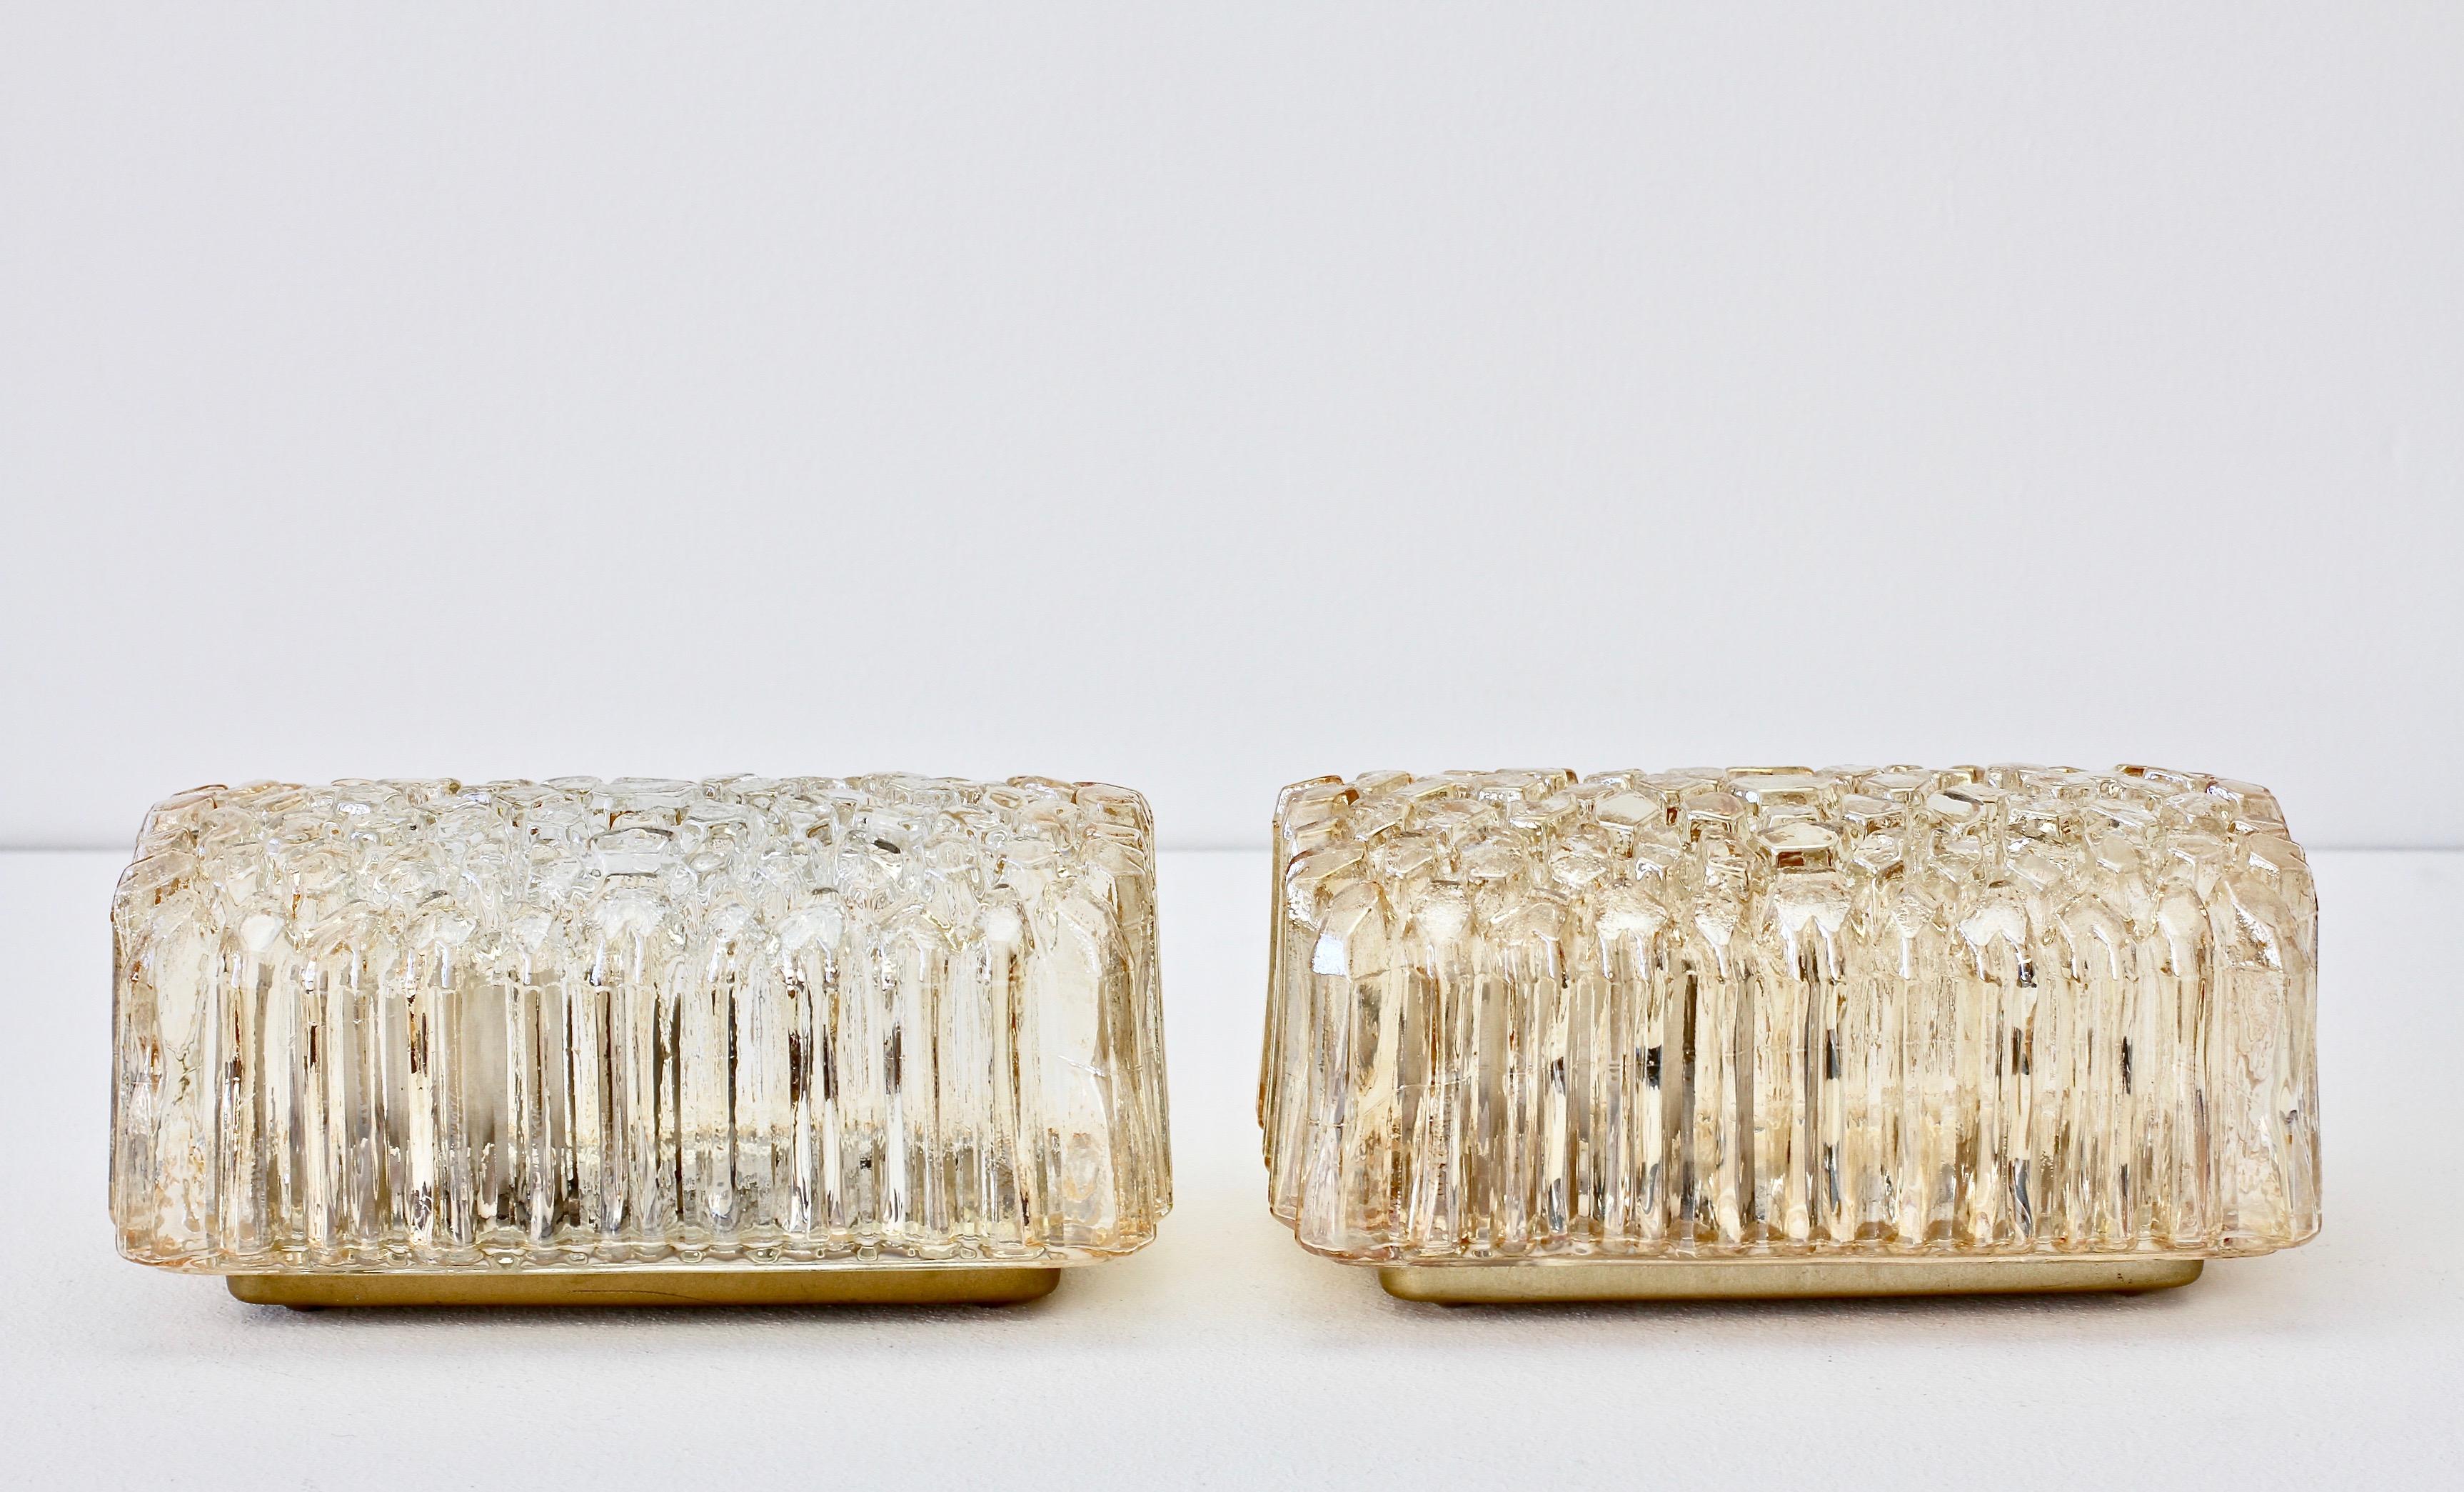 20th Century Limburg Pair of Wall Lights 1970s Organic Textured Amber Toned Ice Glass Sconces